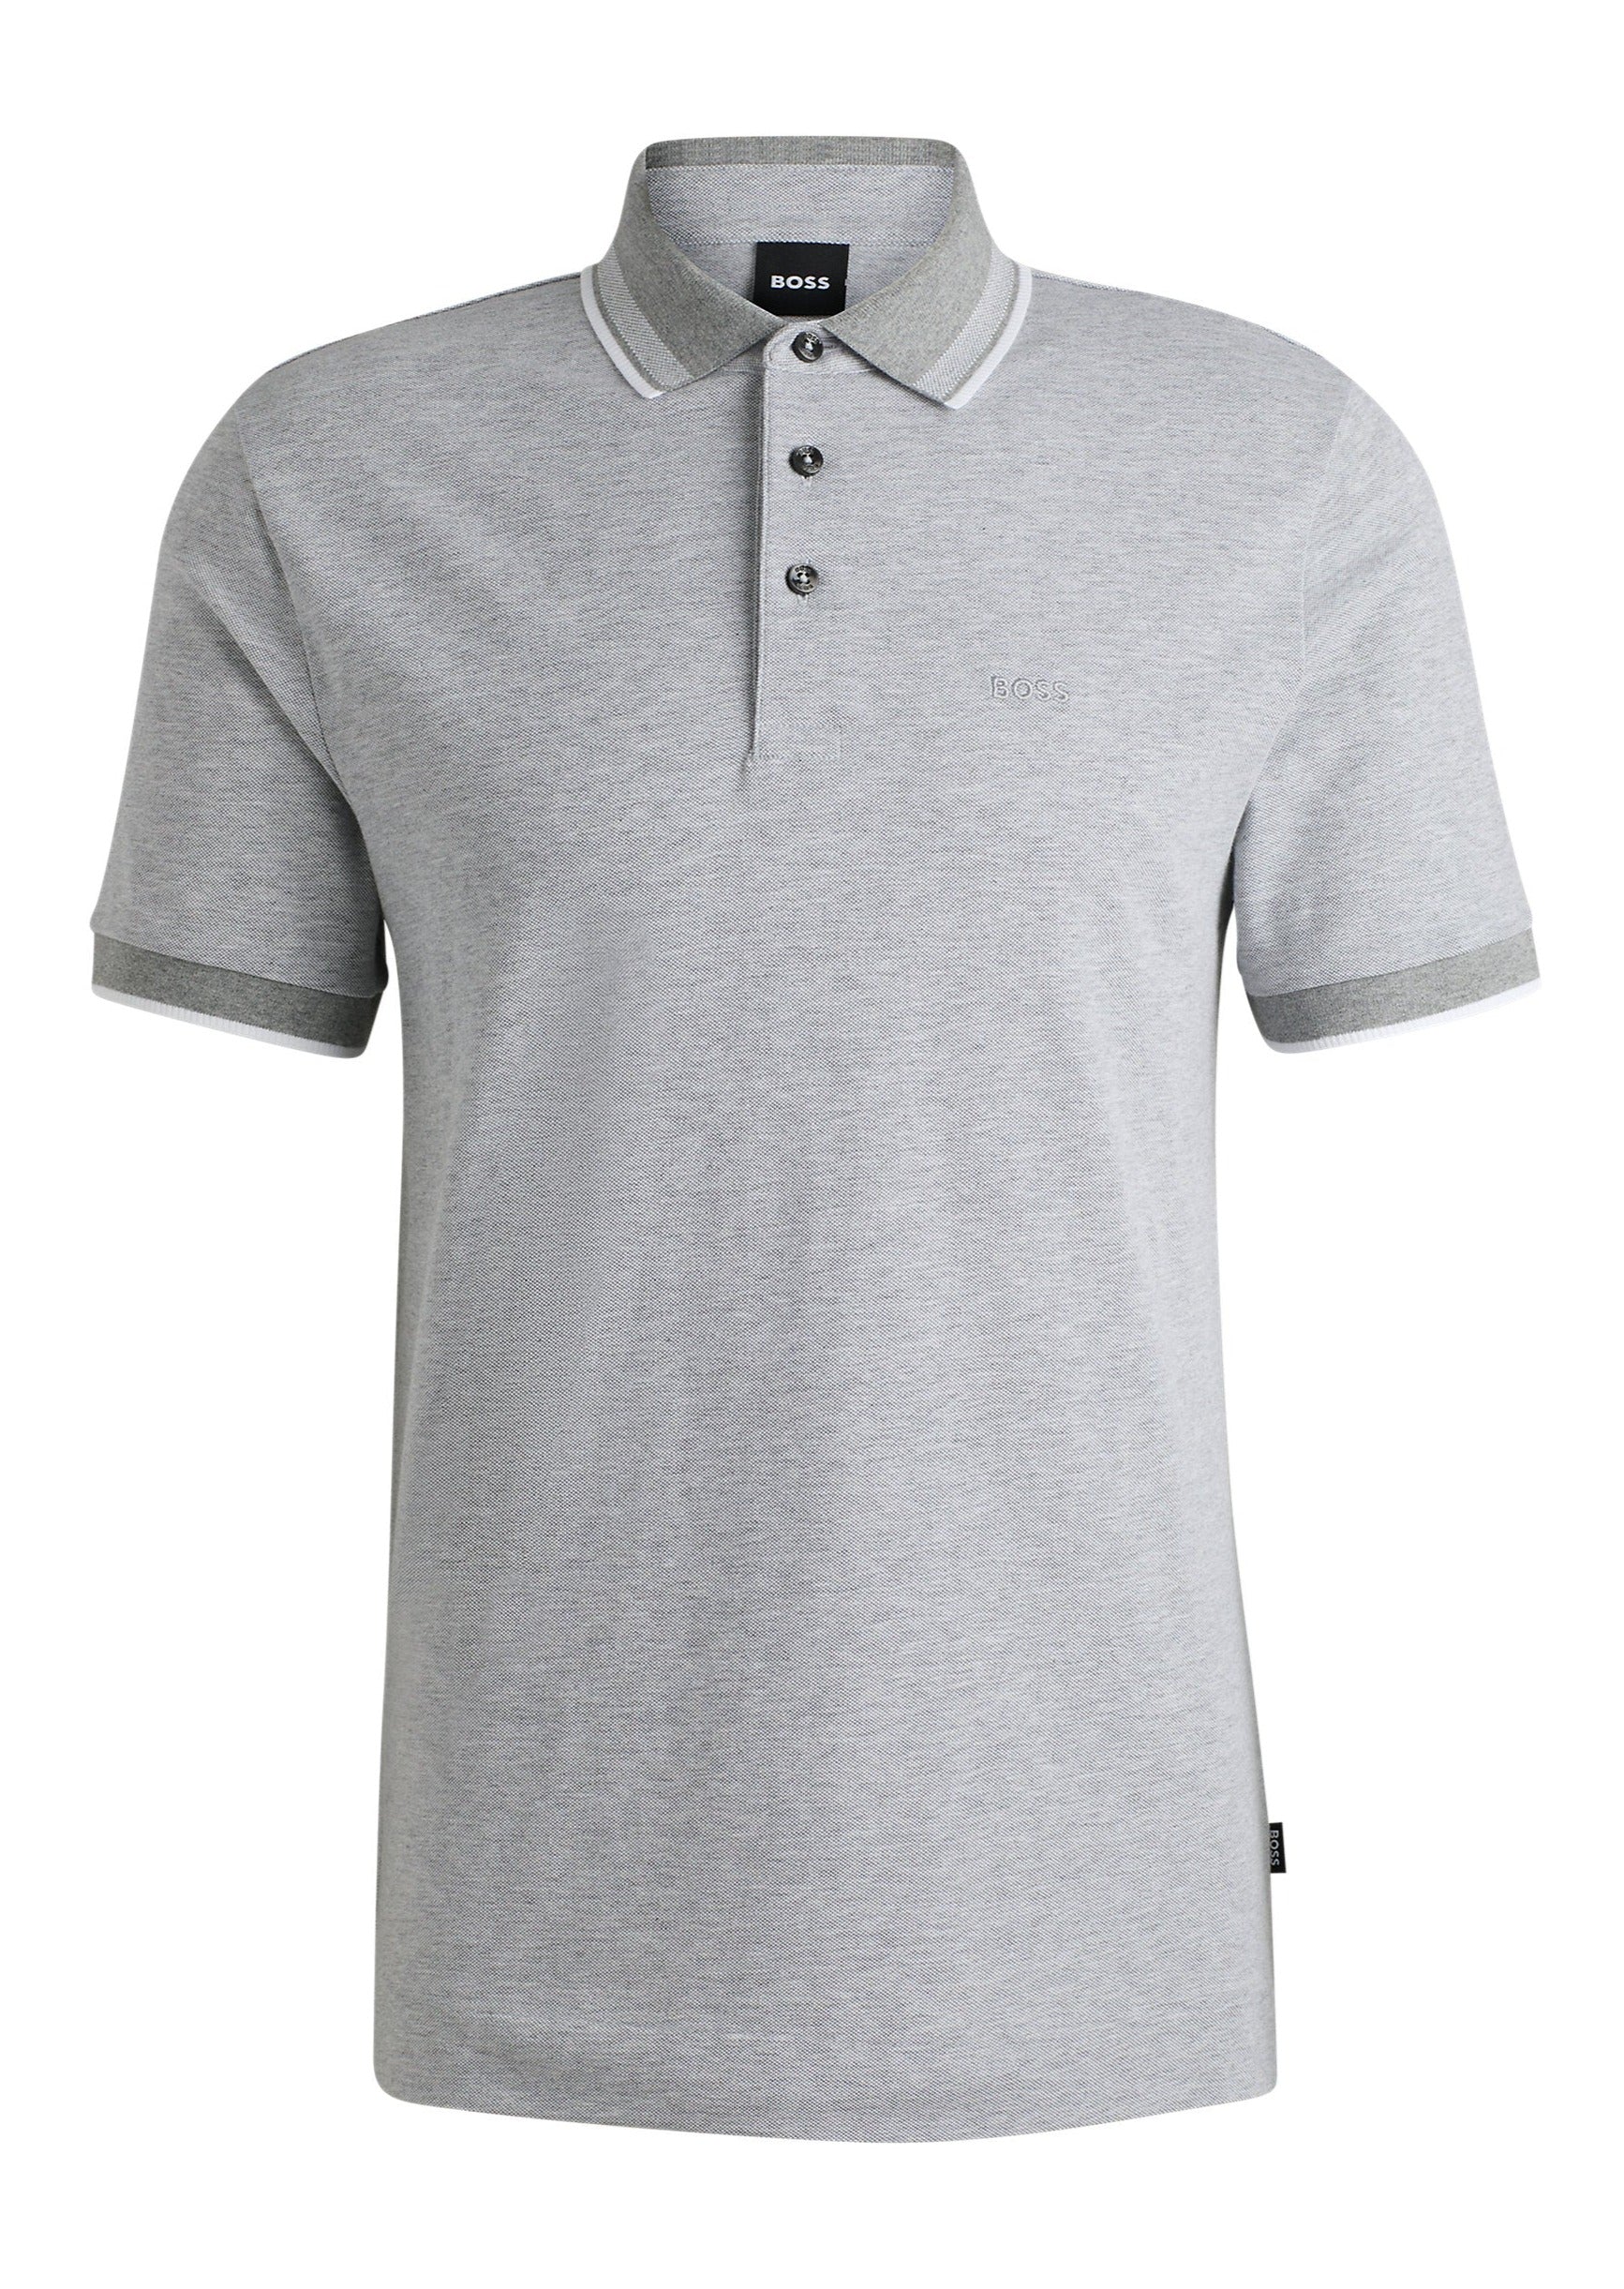 Polo homme BOSS gris | Georgespaul